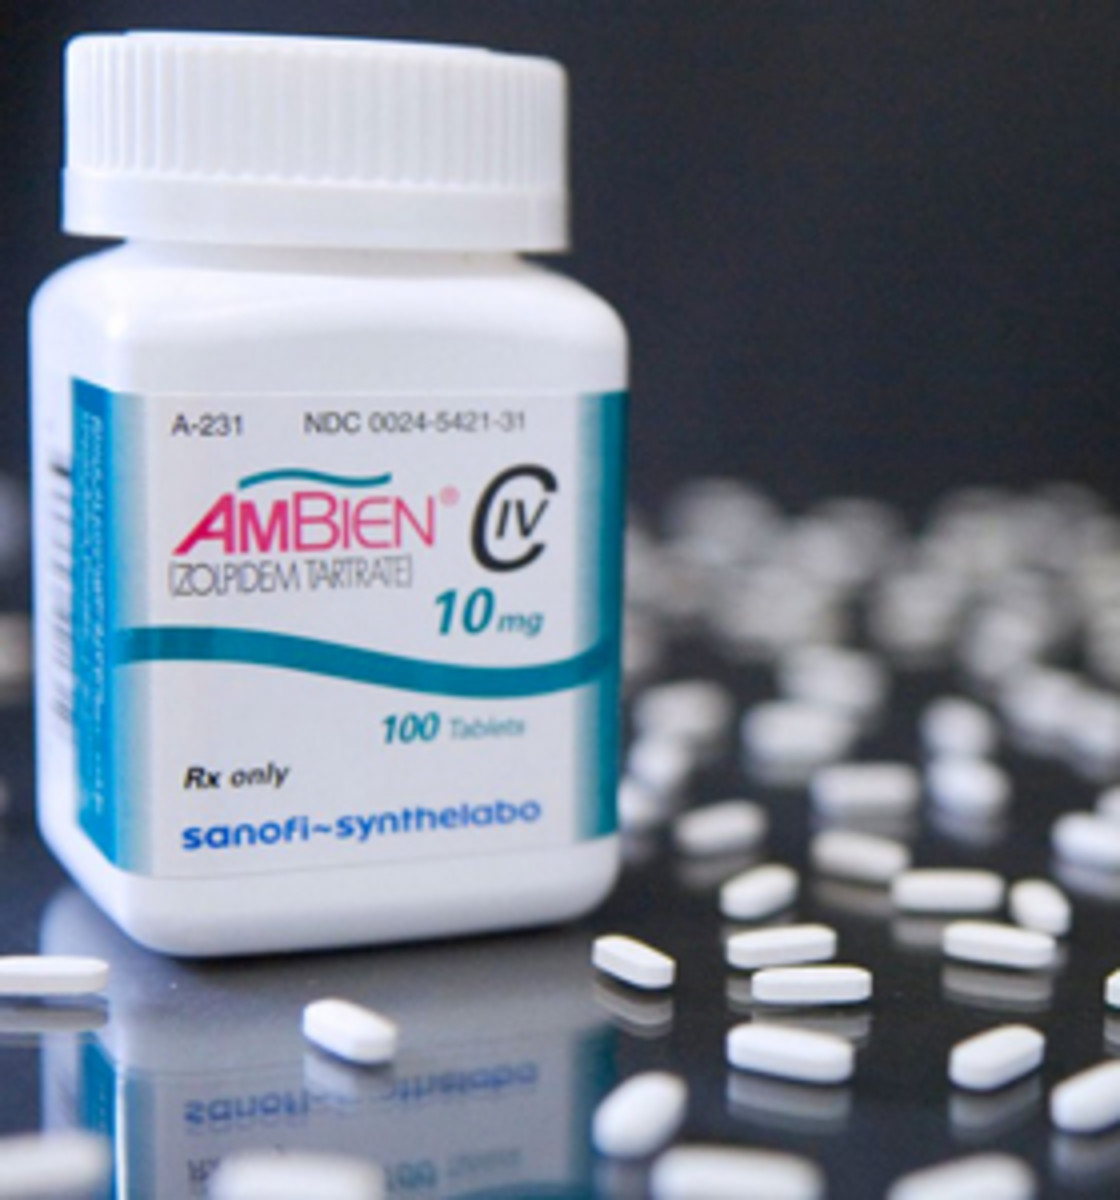 Ambien - Its Uses, Dosage and Side Effects